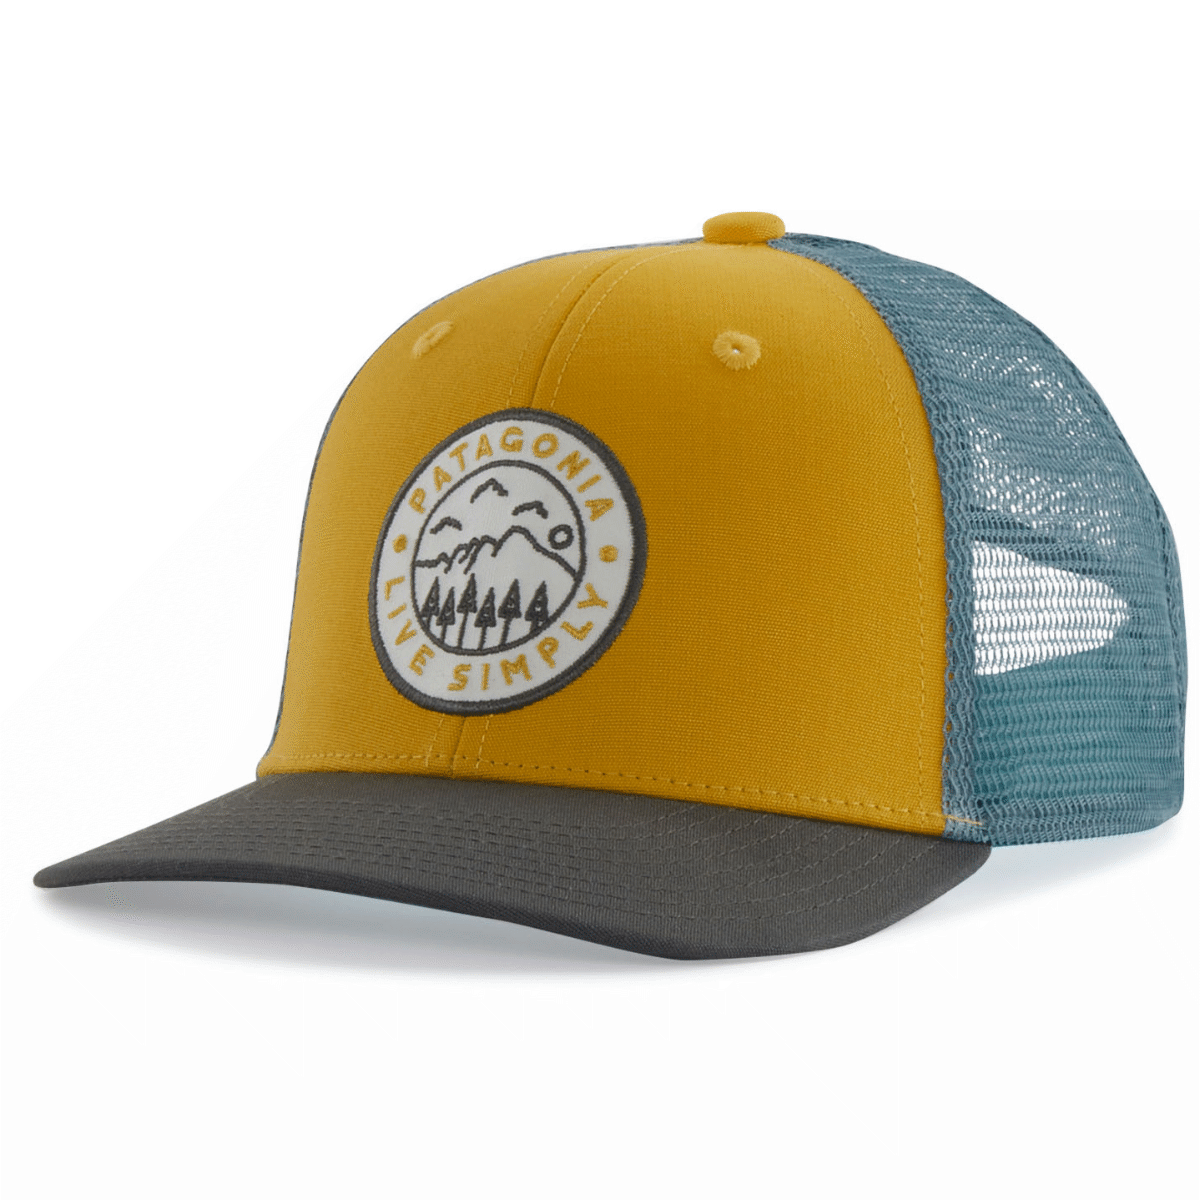 Patagonia Kid's Trucker Hat: Live Simply Crest: Hawk Gold